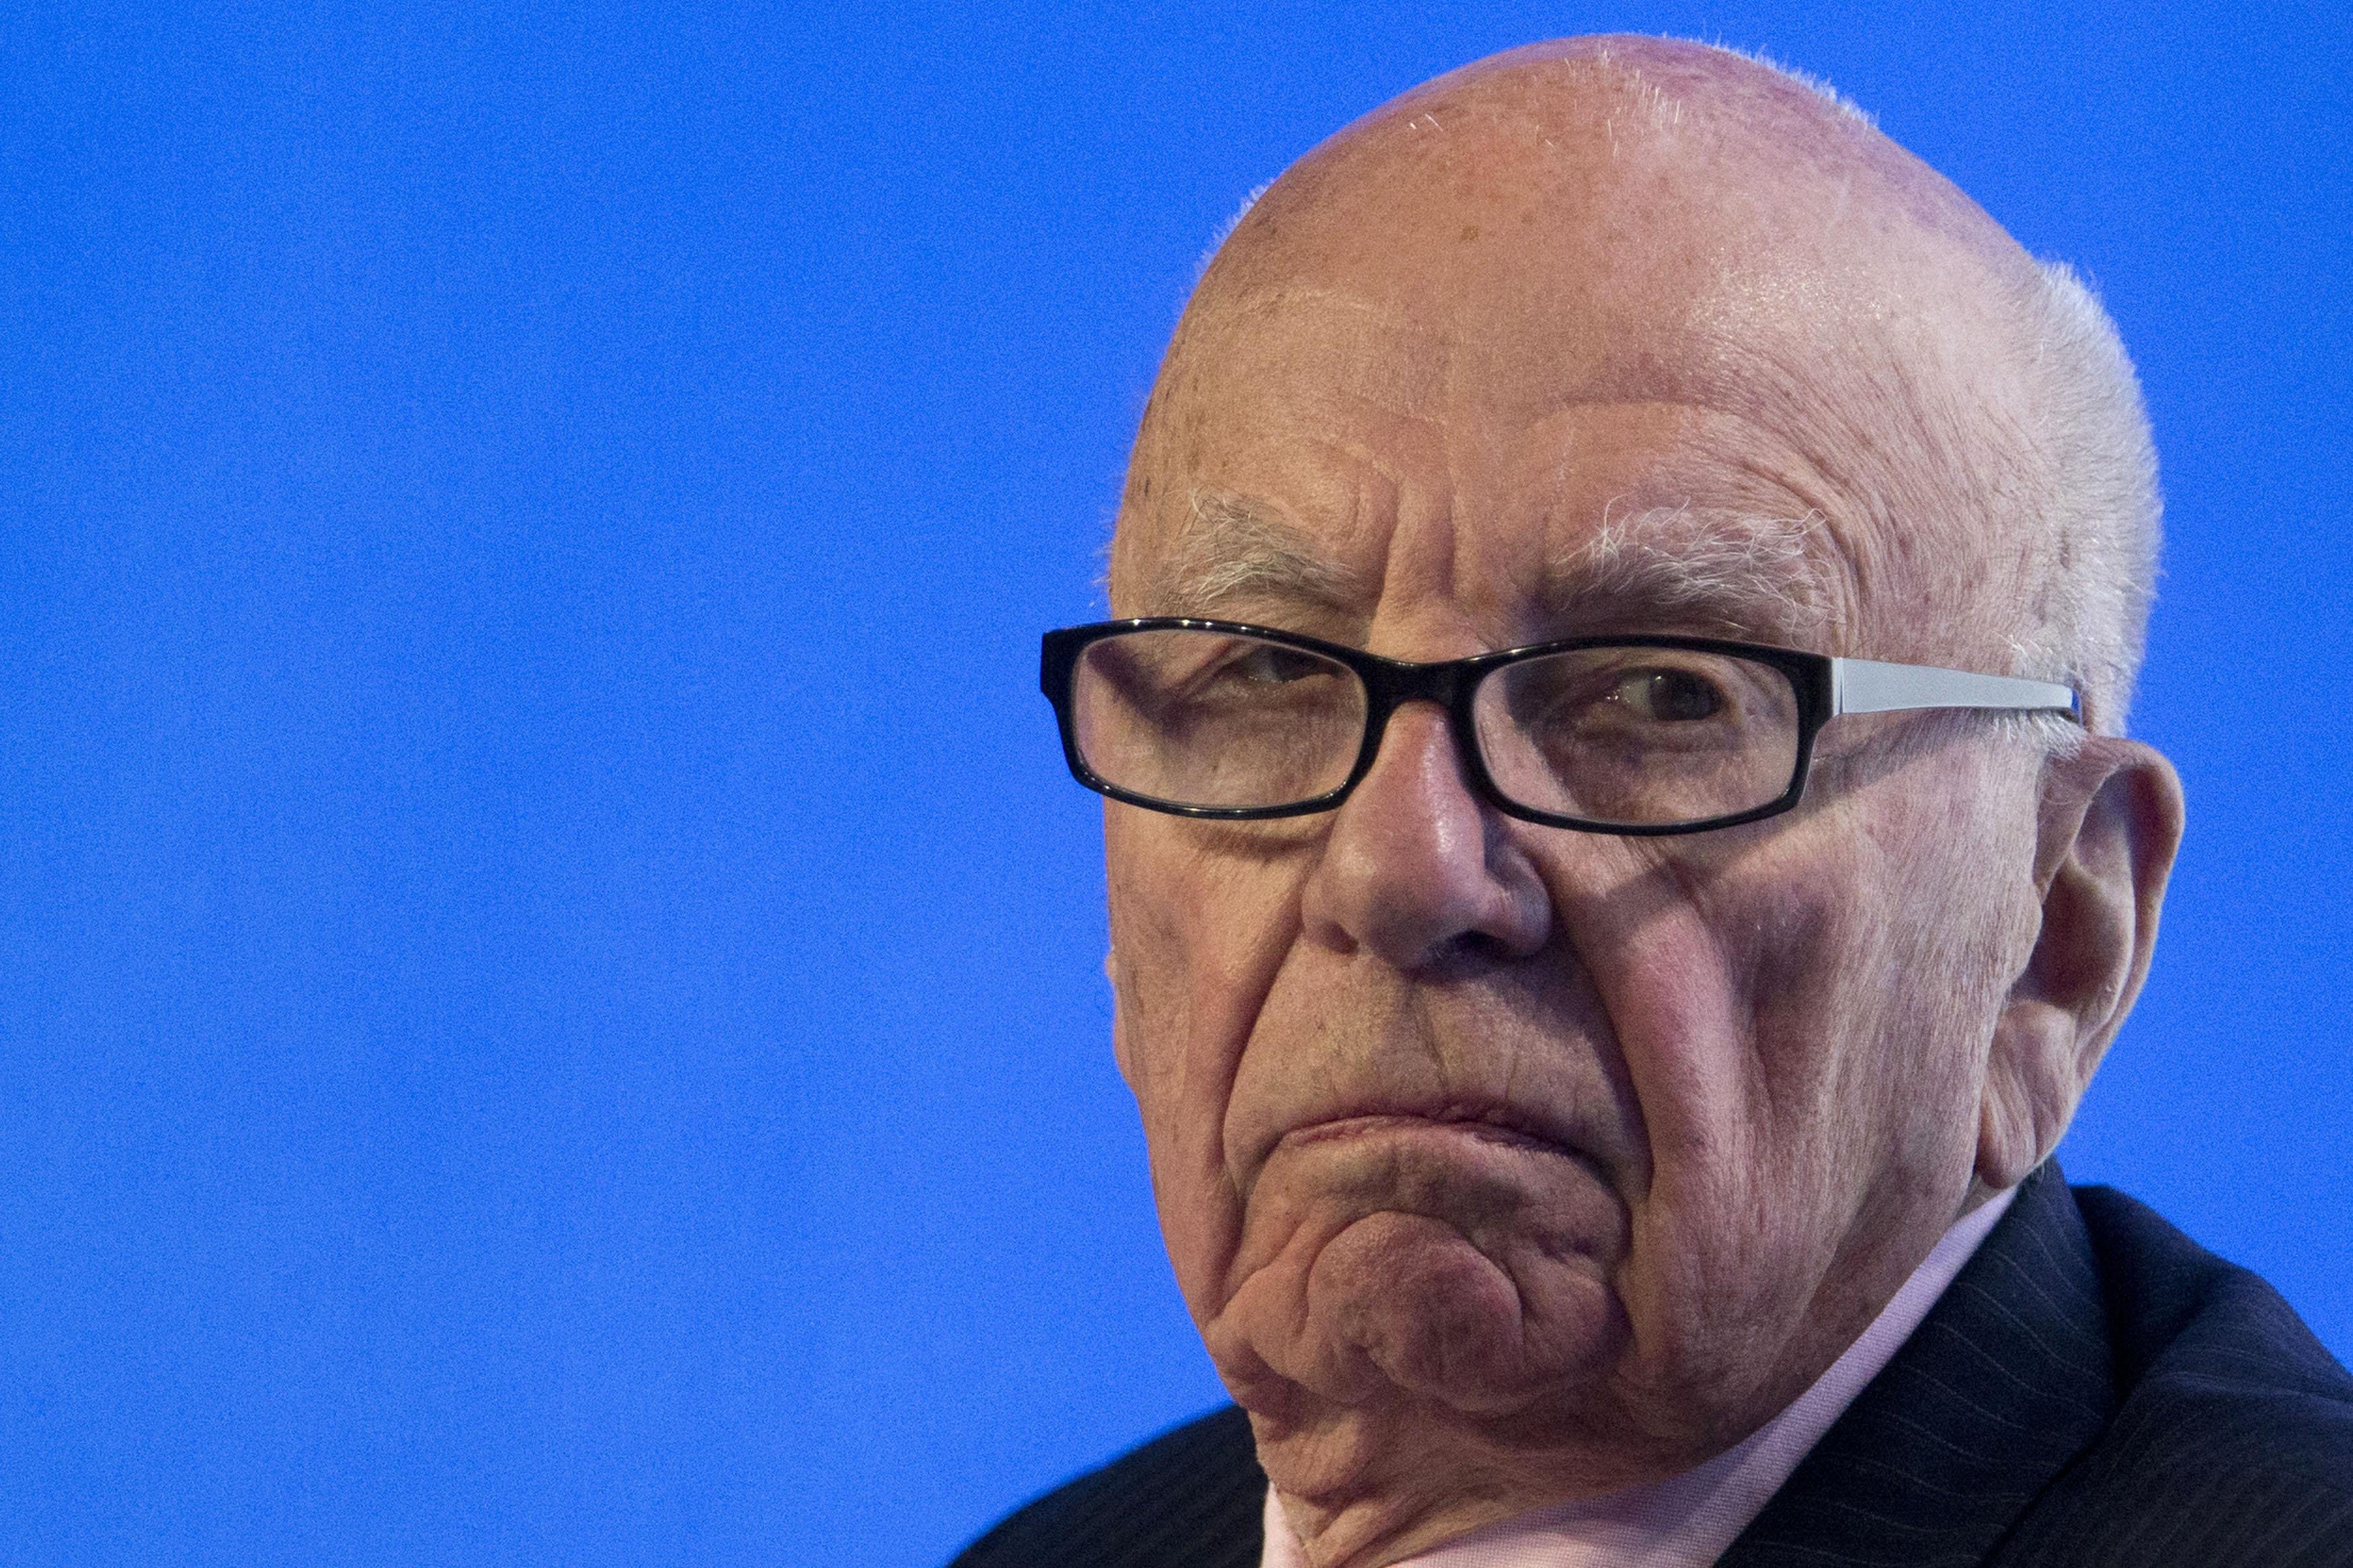 Rupert Murdoch Reportedly Planning Another Ill-Conceived Attack on Trump Ben Mathis-Lilley